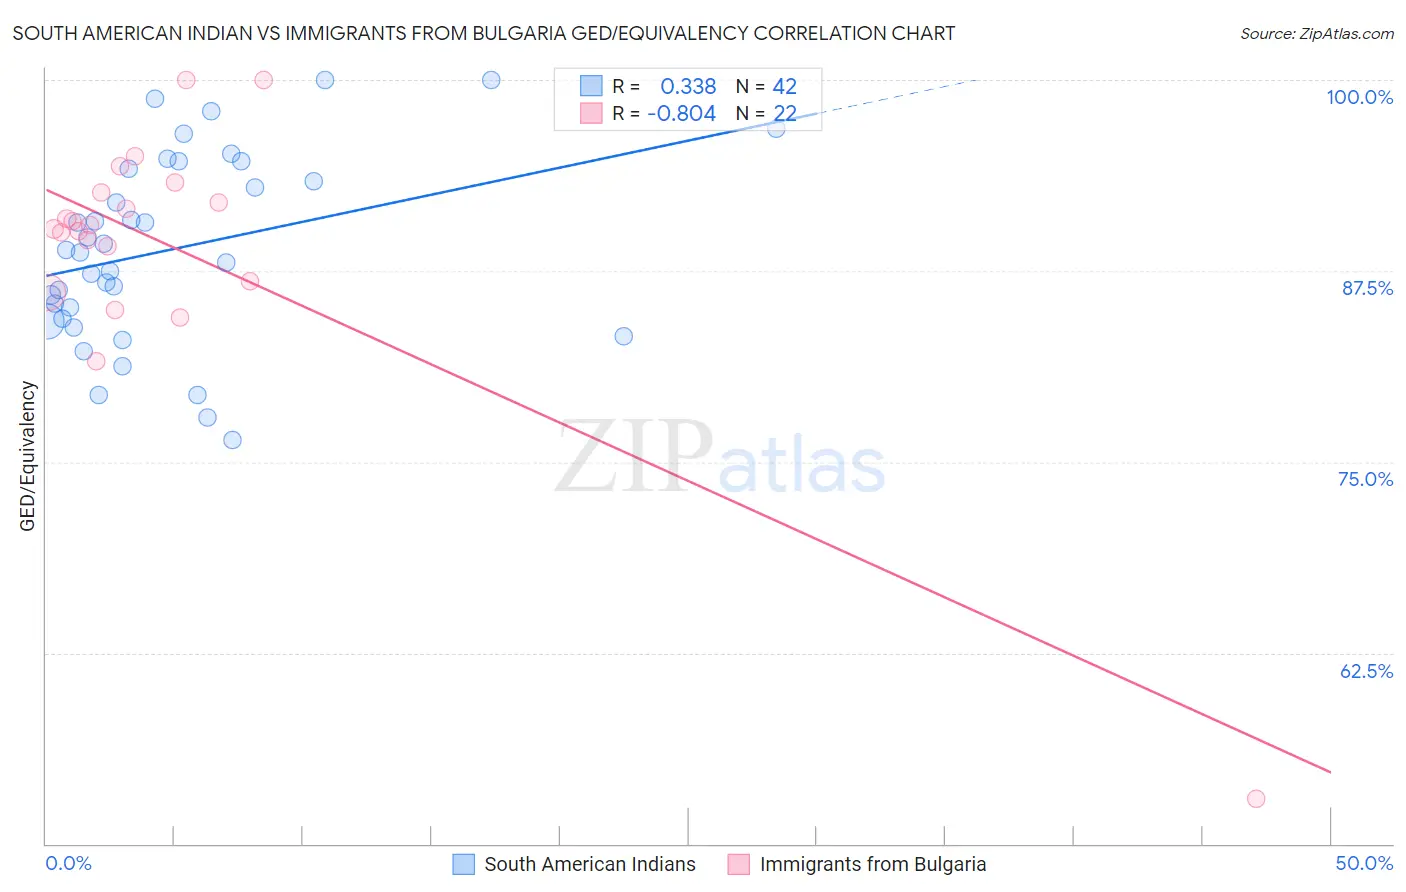 South American Indian vs Immigrants from Bulgaria GED/Equivalency